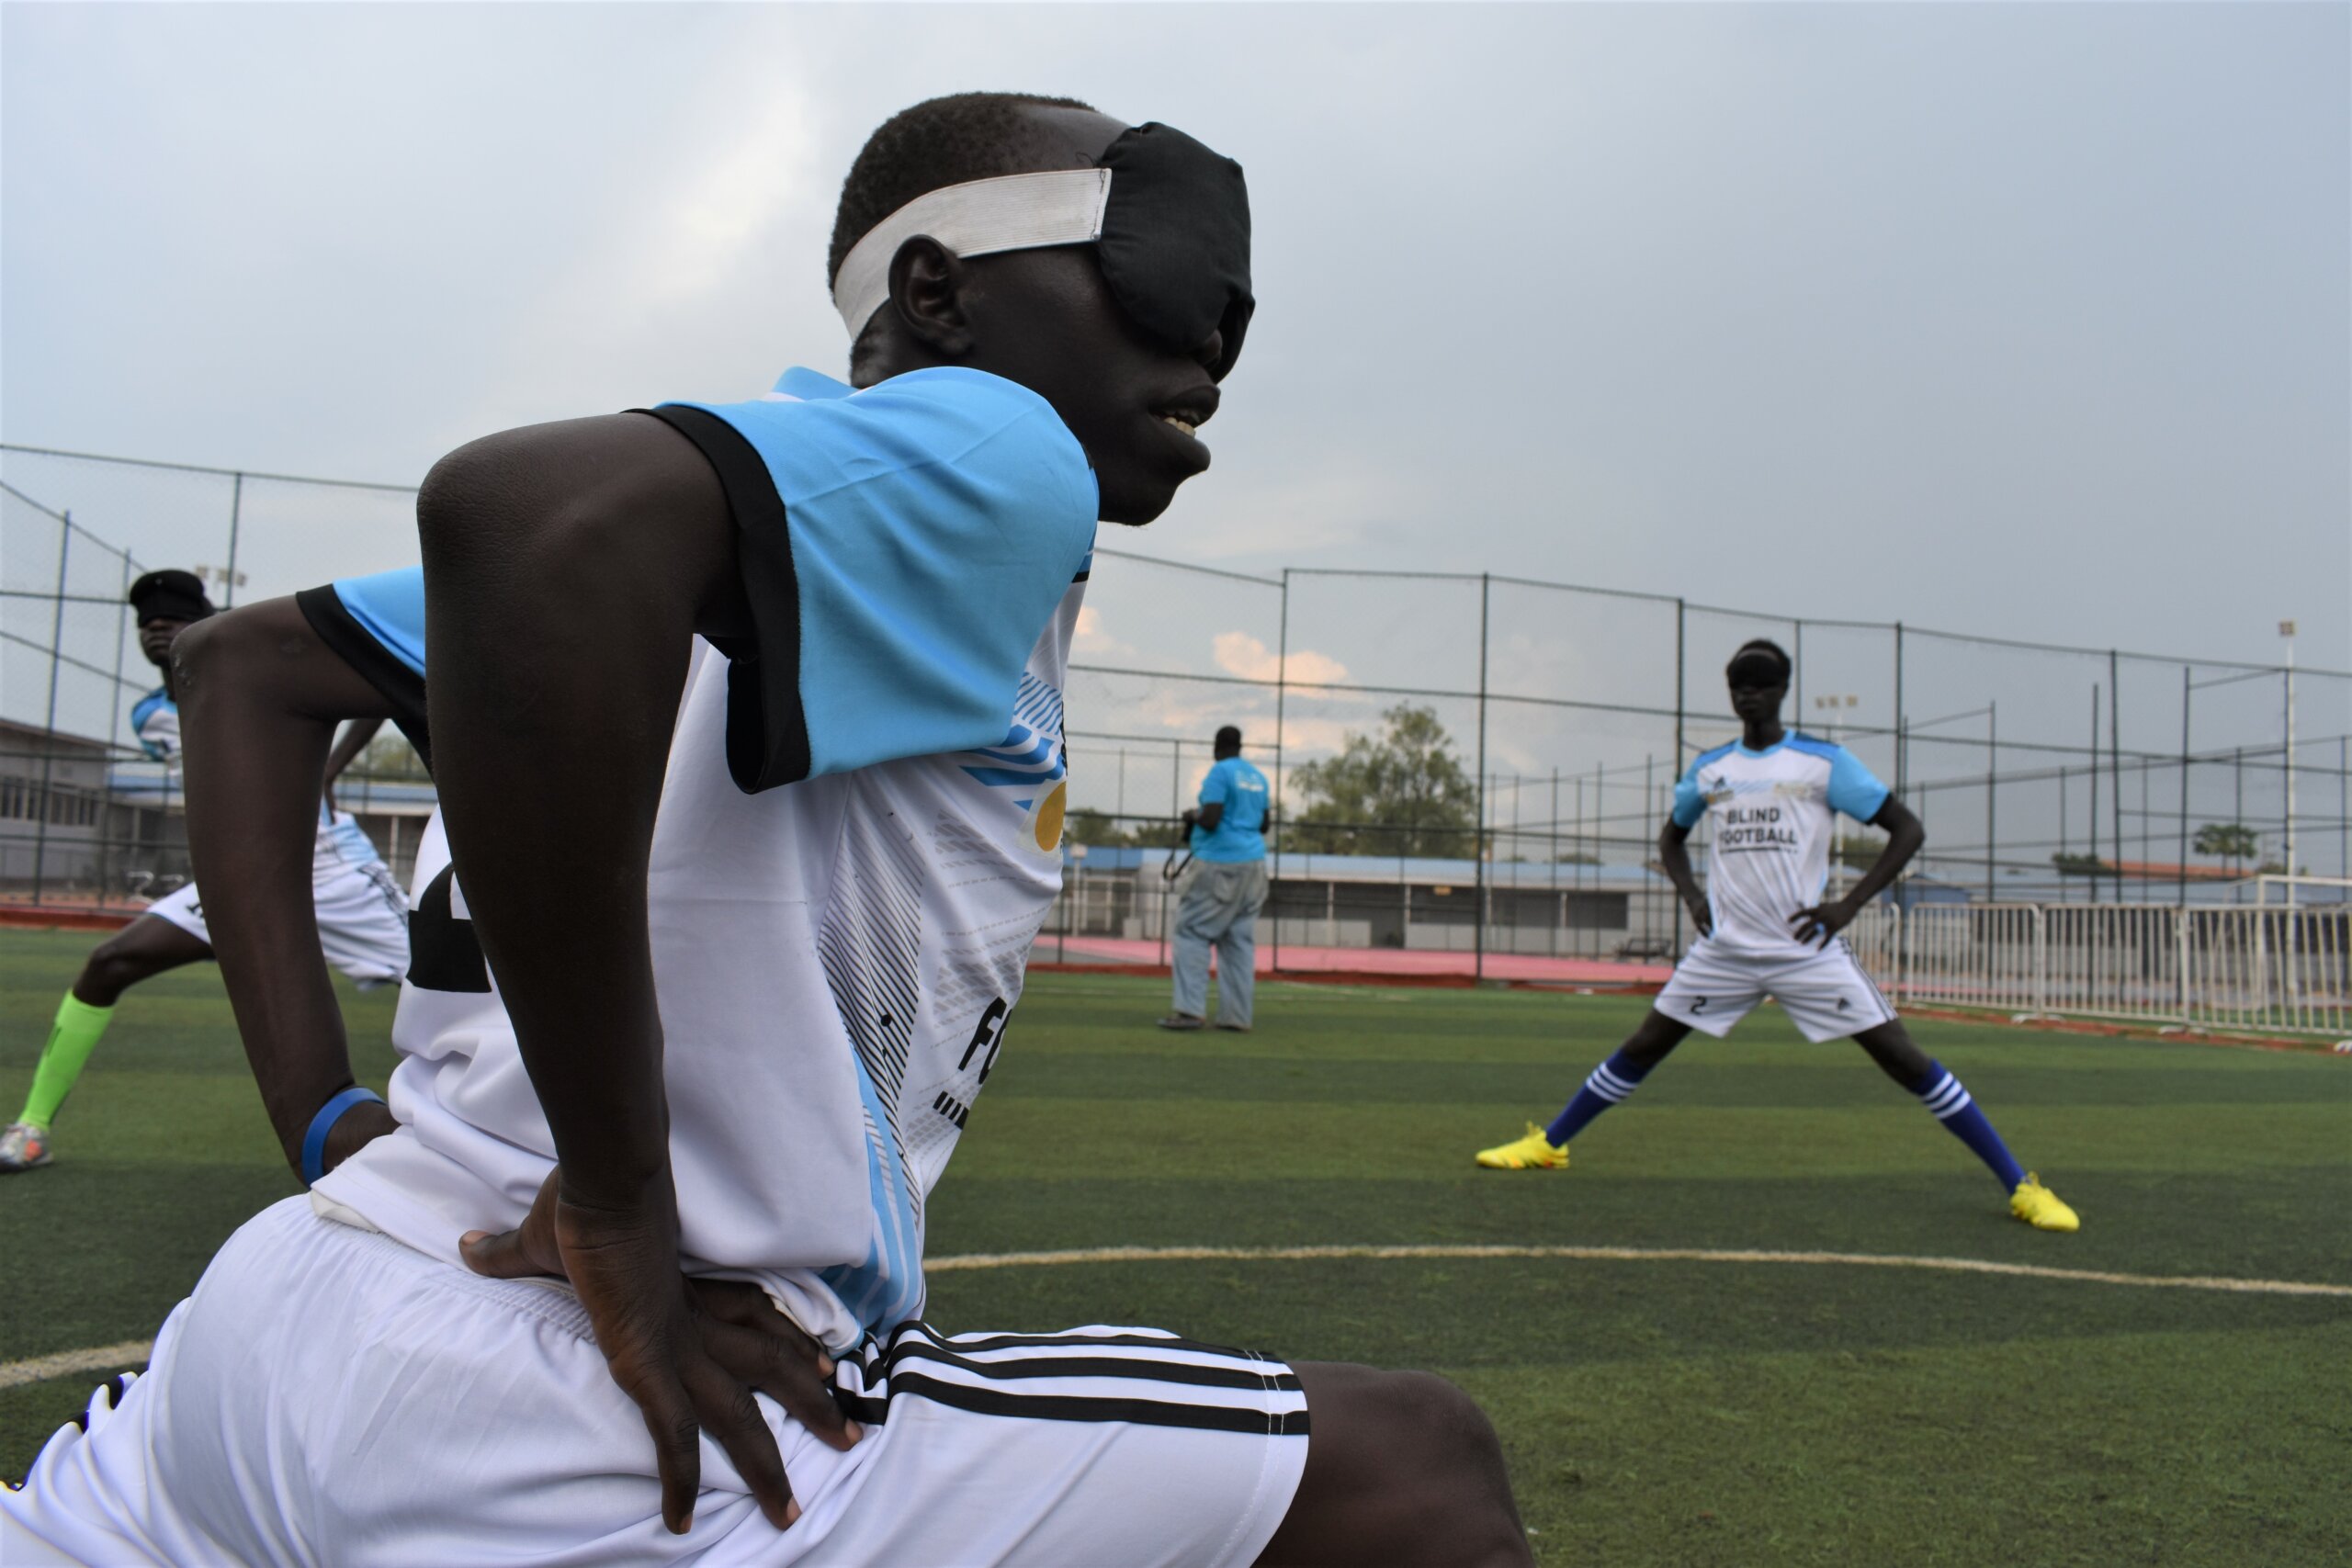 A young man from South Sudan is stretching in a soccer jersey with his teammates on a big field.